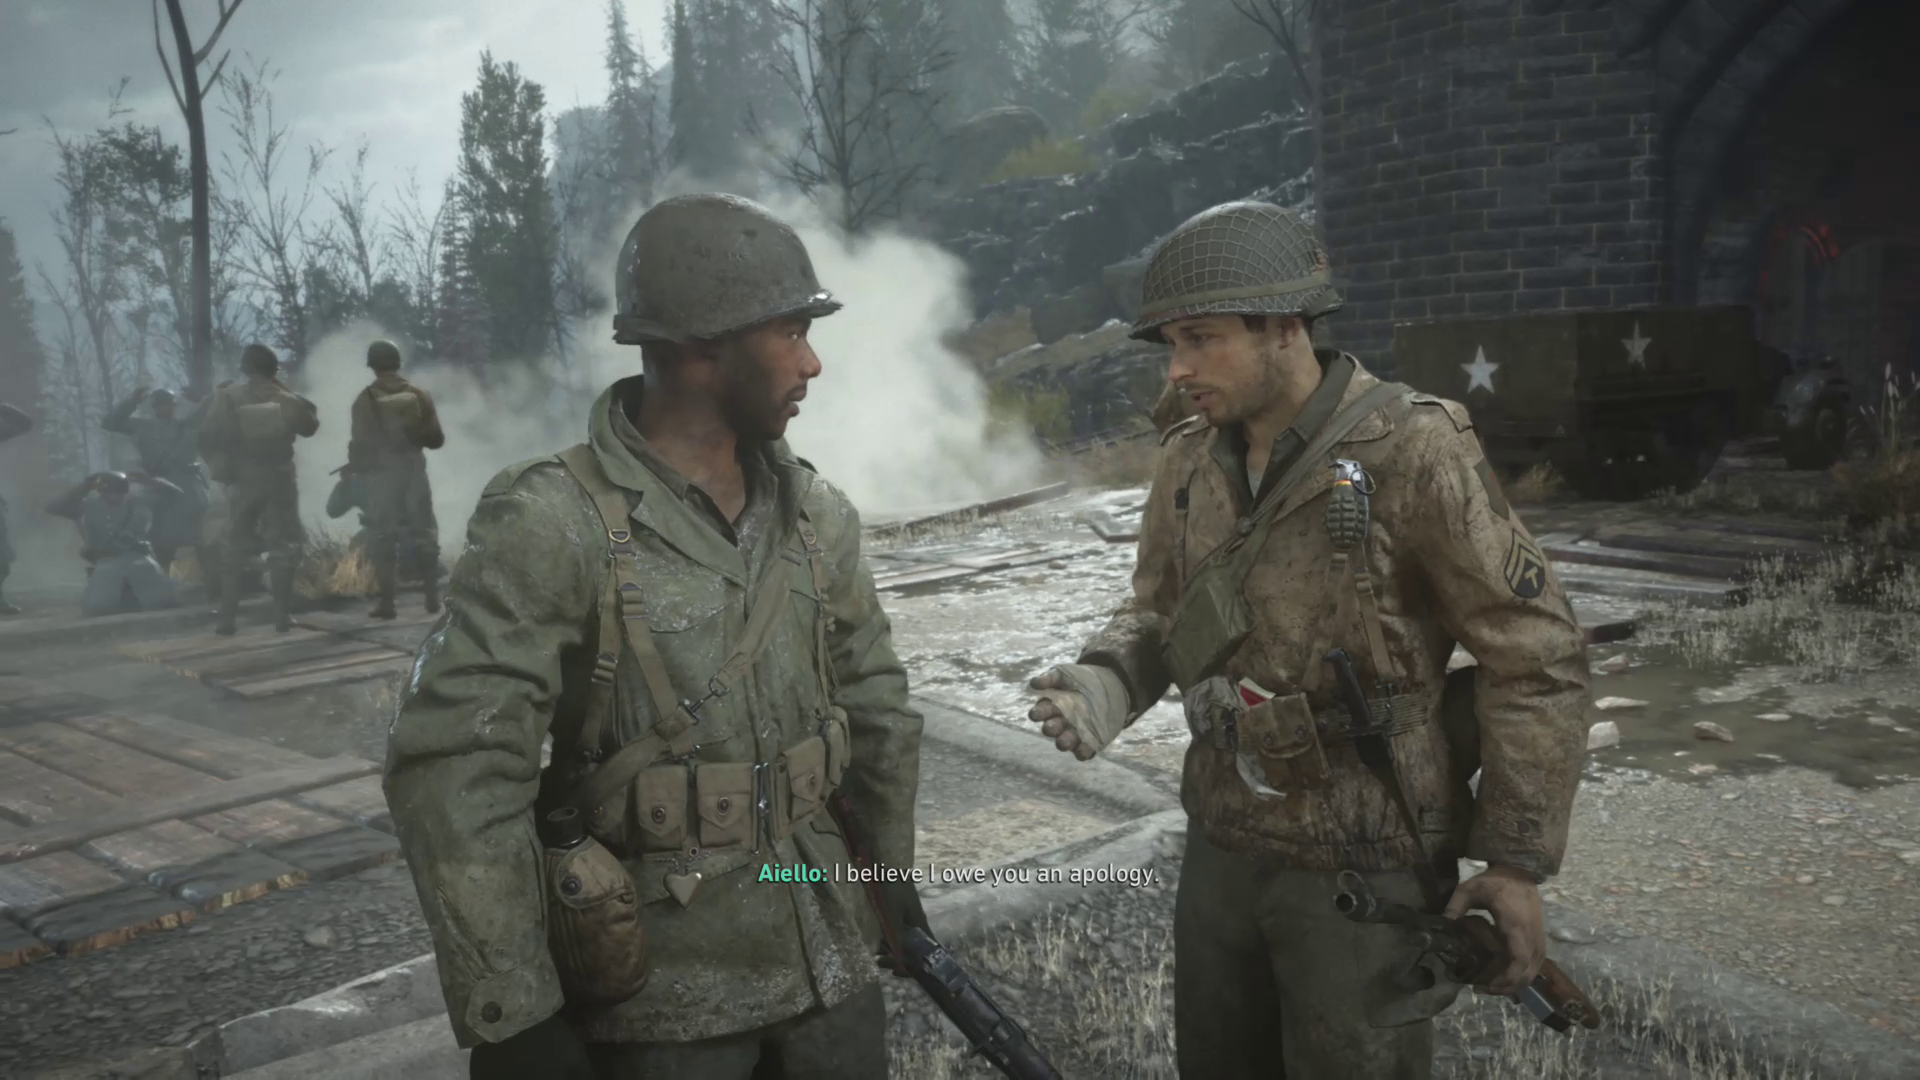 Call of Duty: WWII should have cut its clumsy racism subplot